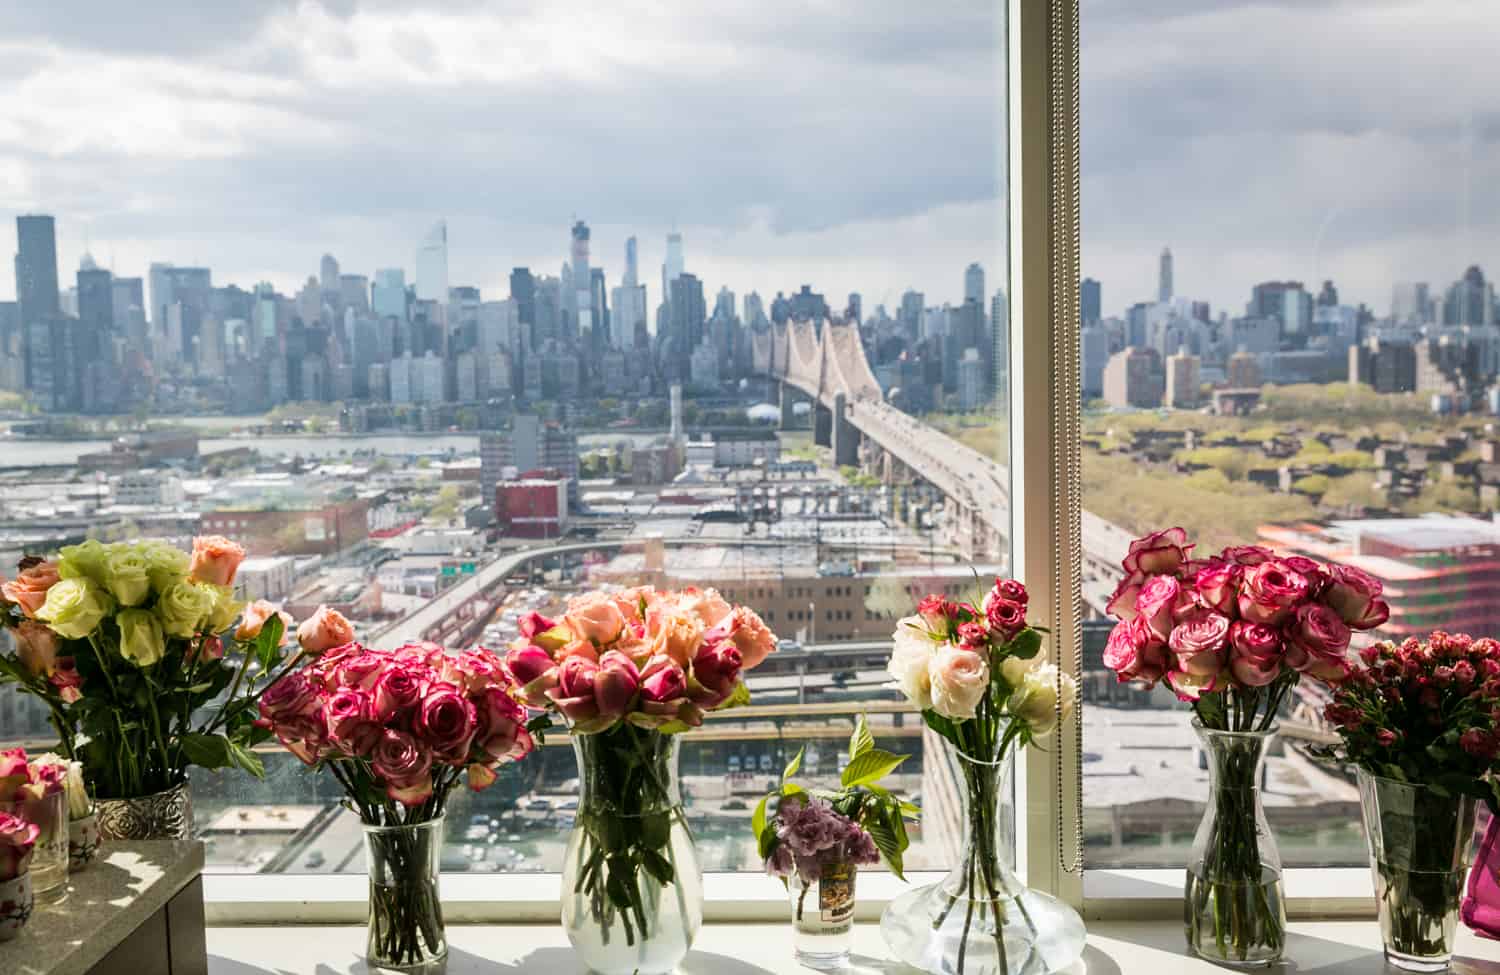 Vases of flowers on windowsill with NYC skyline in background